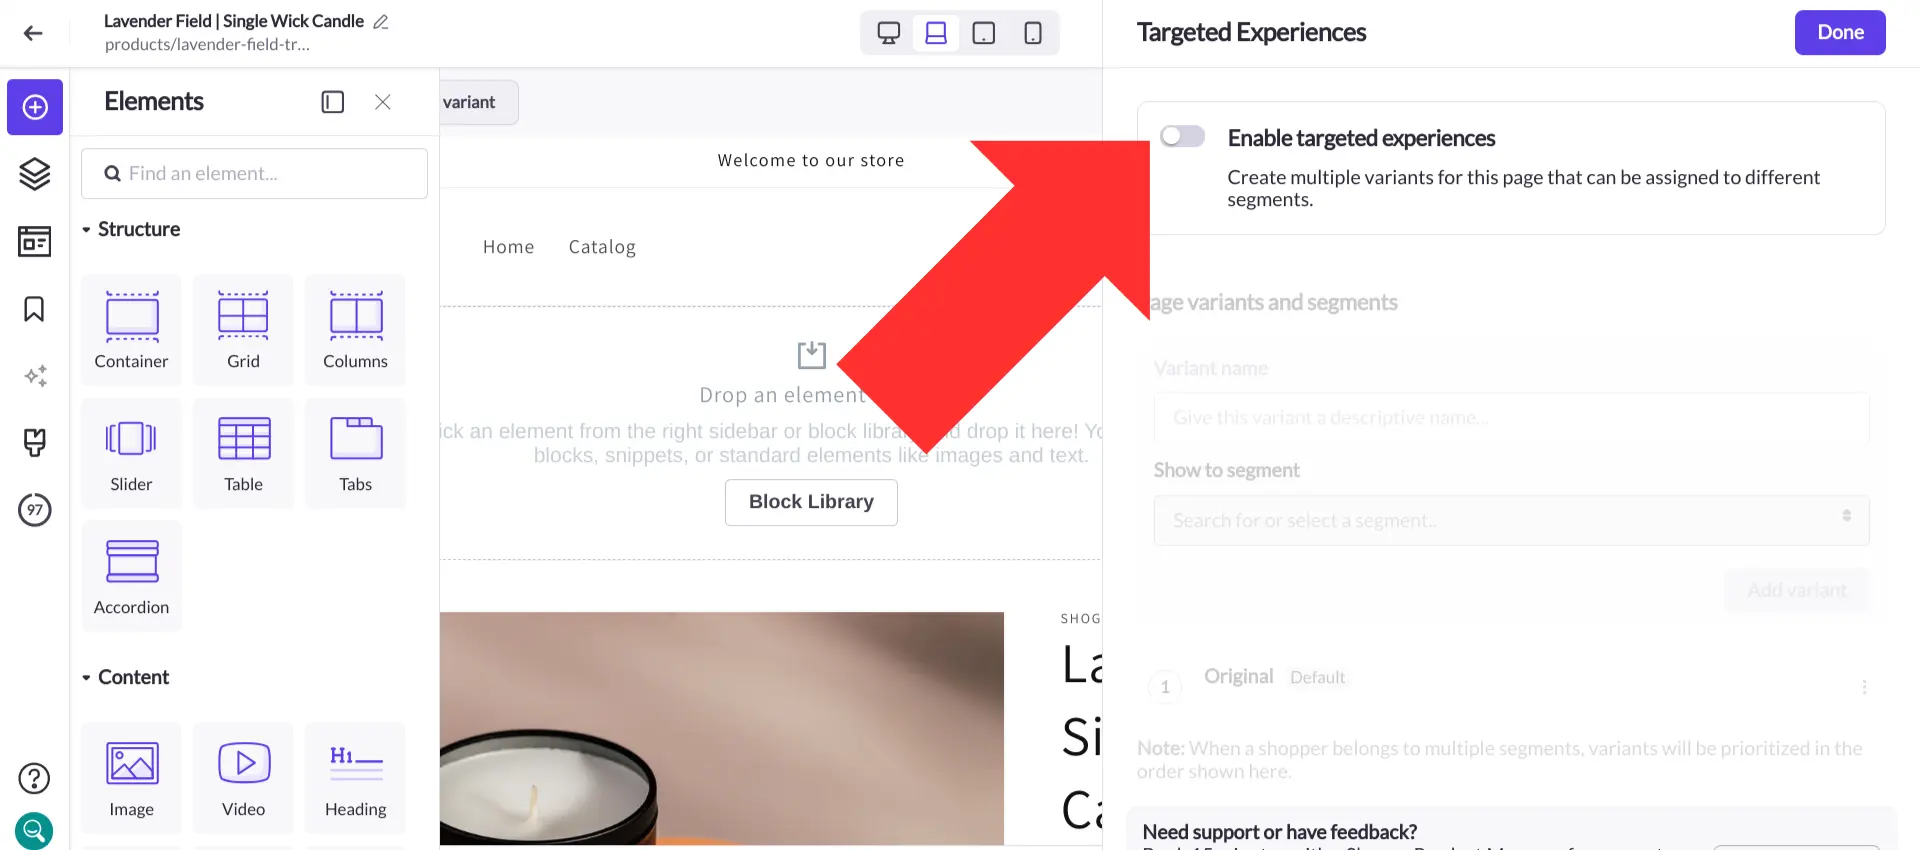 Toggle the “Enable targeted experiences” option on.